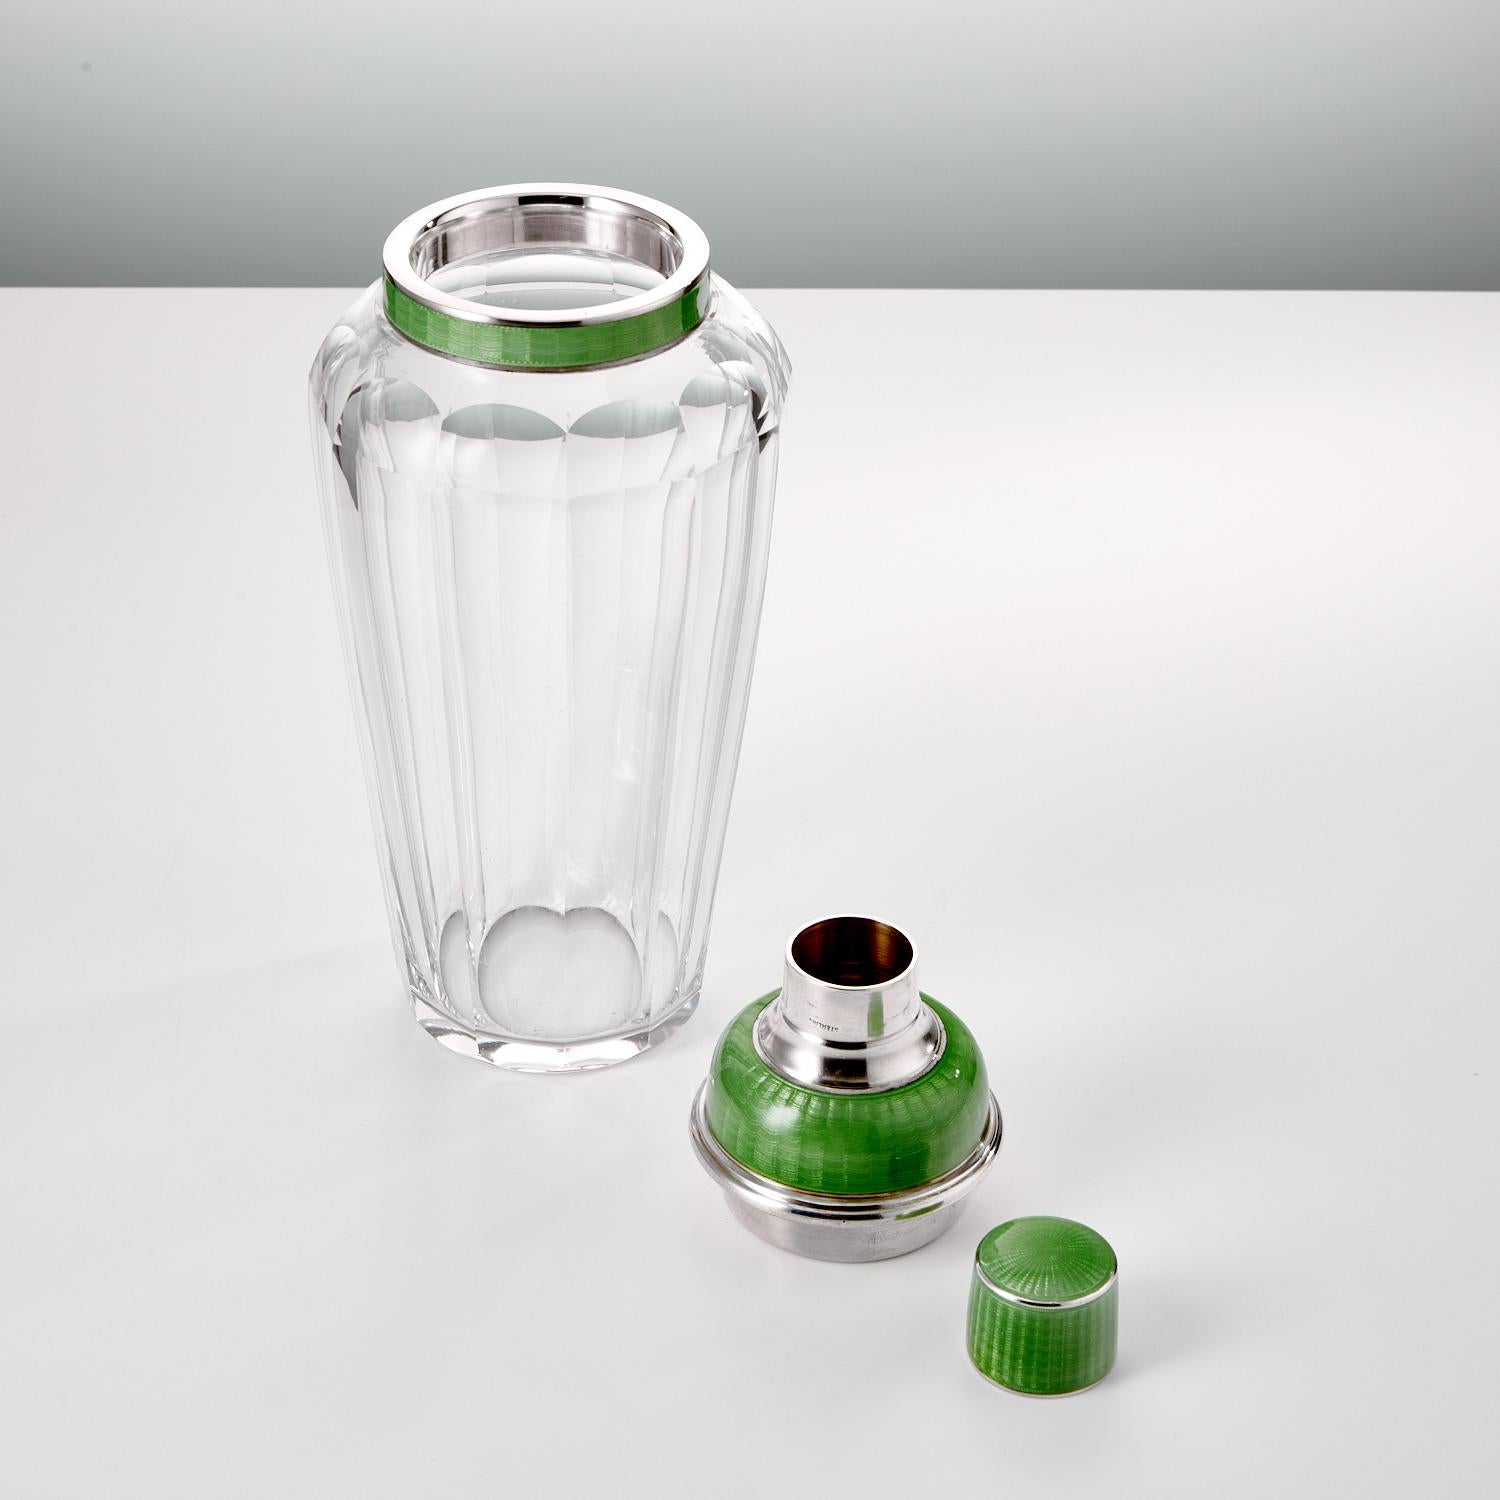 Art Deco sterling silver & enamel cocktail Shaker Date Circa 1930-35.

A beautiful rare silver and enamel cocktail Shaker with a tapered segmented glass form body. The 'Apple Green' coloured enamel is in superb quality with good translucent glaze